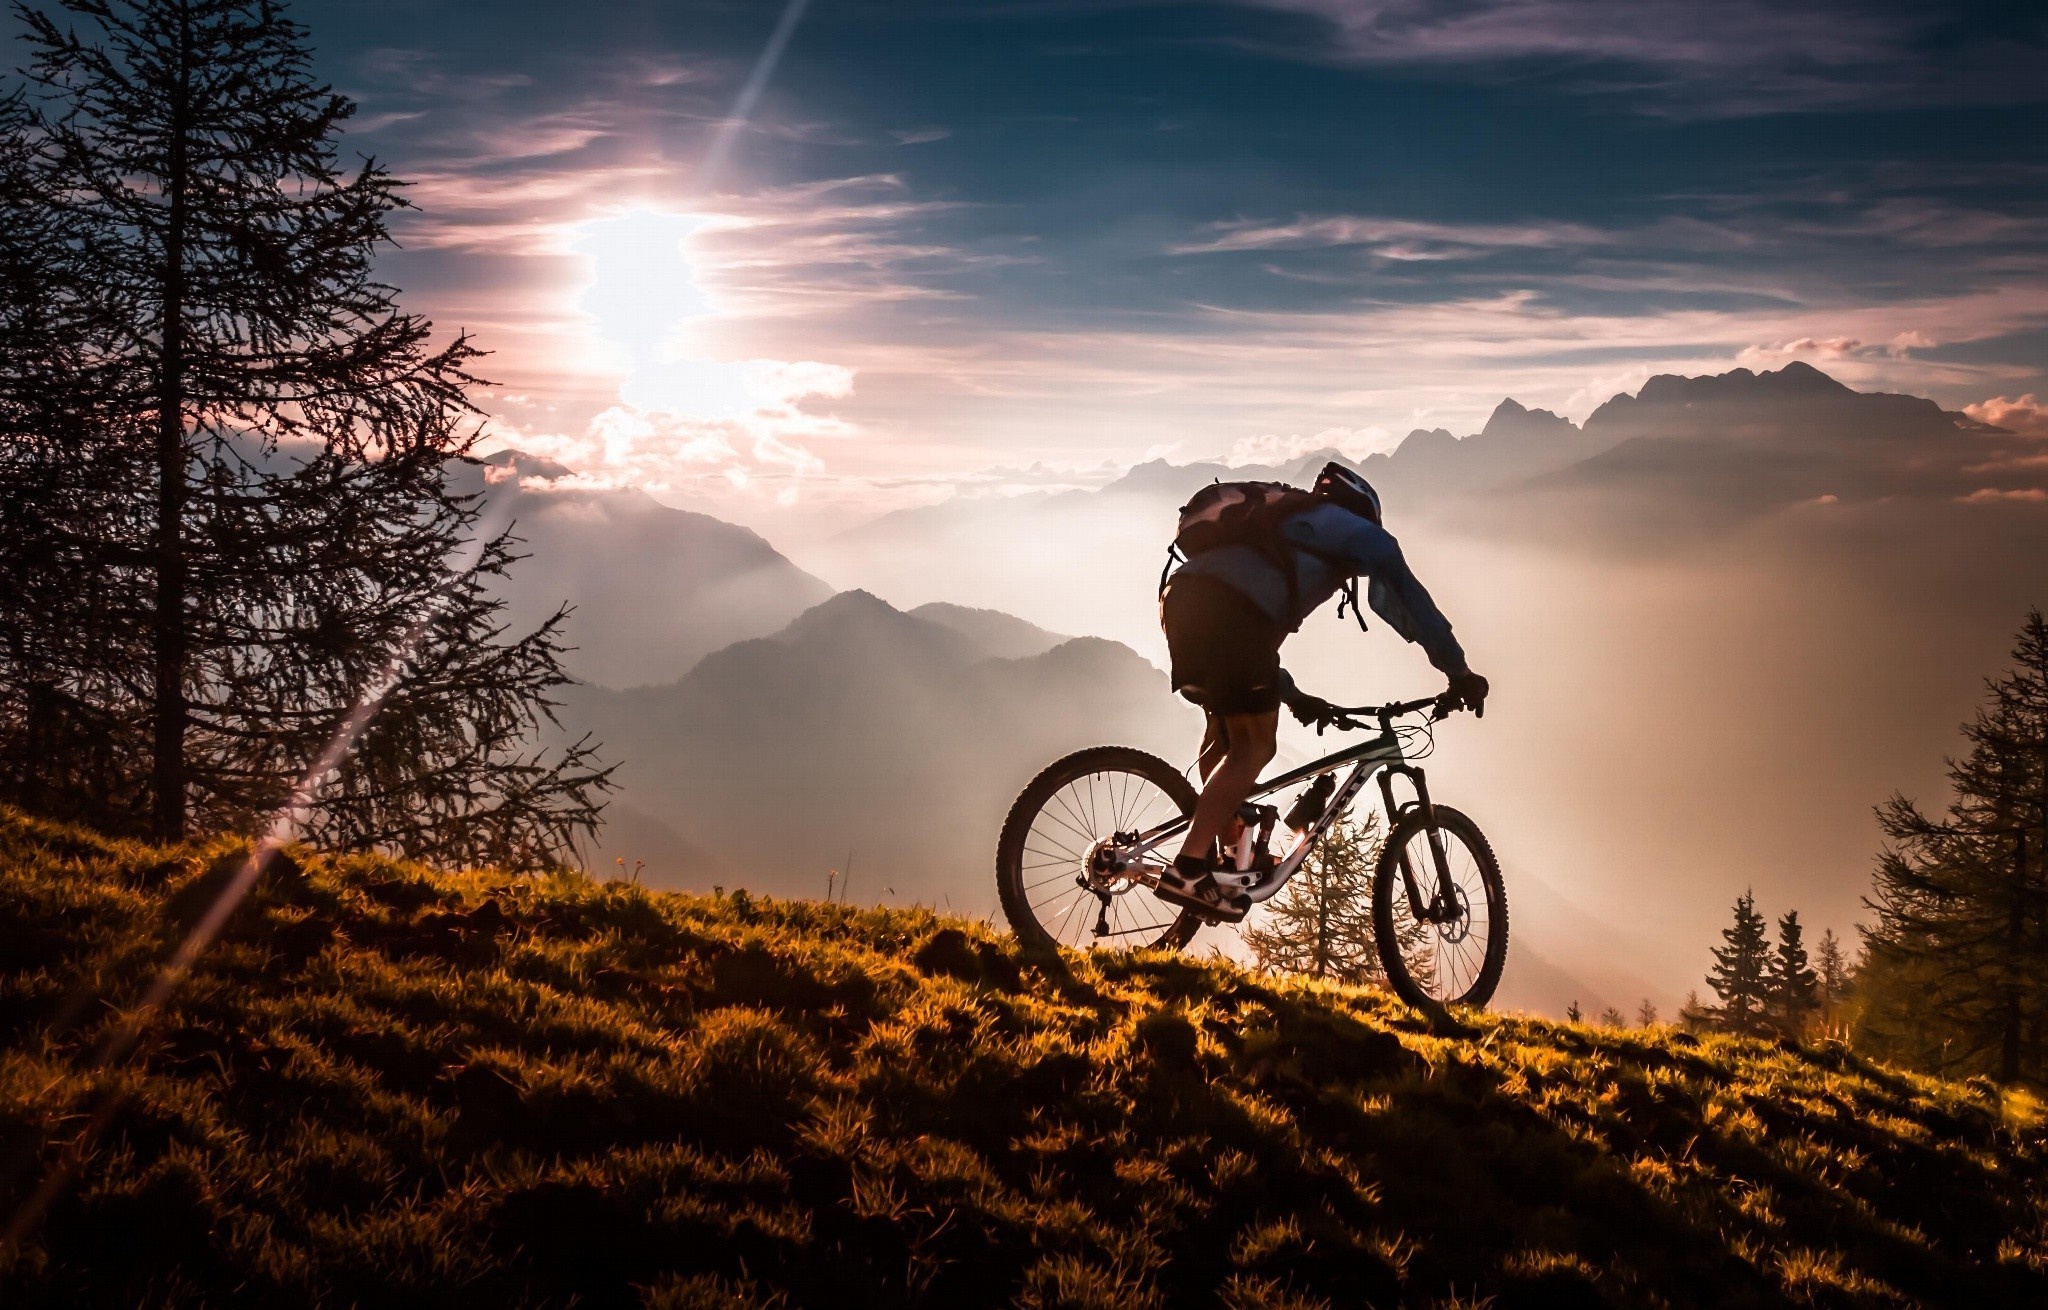 Nature-inspired bicycle wallpapers, Connecting with nature's beauty, 2050x1310 HD Desktop